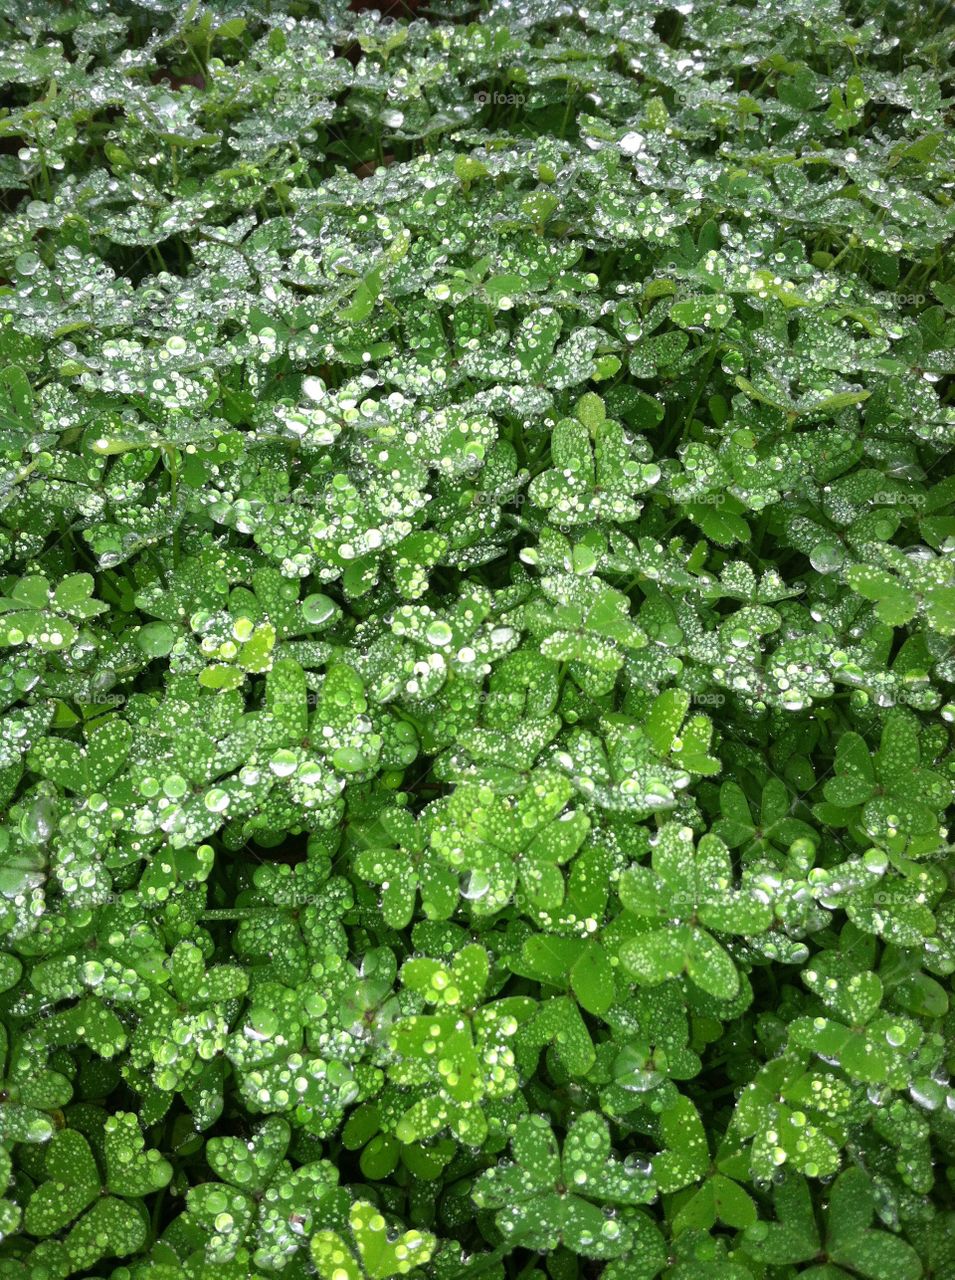 Clovers. Dew covered clover patch